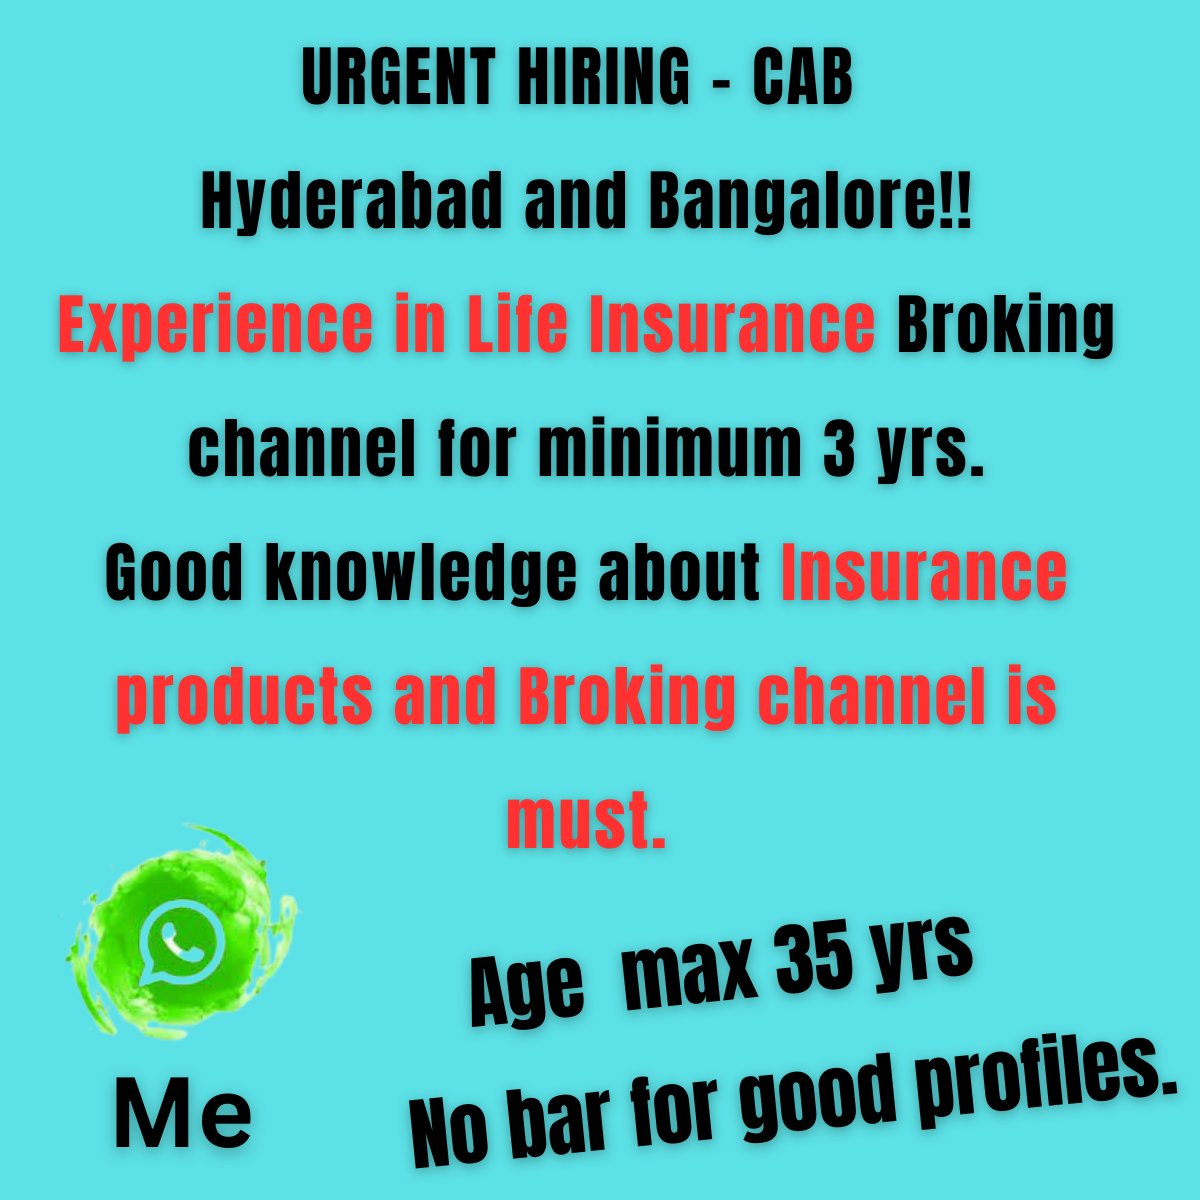 Hiring now Cab for Life Leading Company in Bangalore and Hyderabad.
#cab #lifeinsurance #broking #broking #lifeinsurance #hiring #openings #bangalorejobs #hyderabadjobs #bangalore #hyderabad #urgentrequirement #lifeinsurancebroker #lifeinsuranceadvisor #lifeinsurancesales